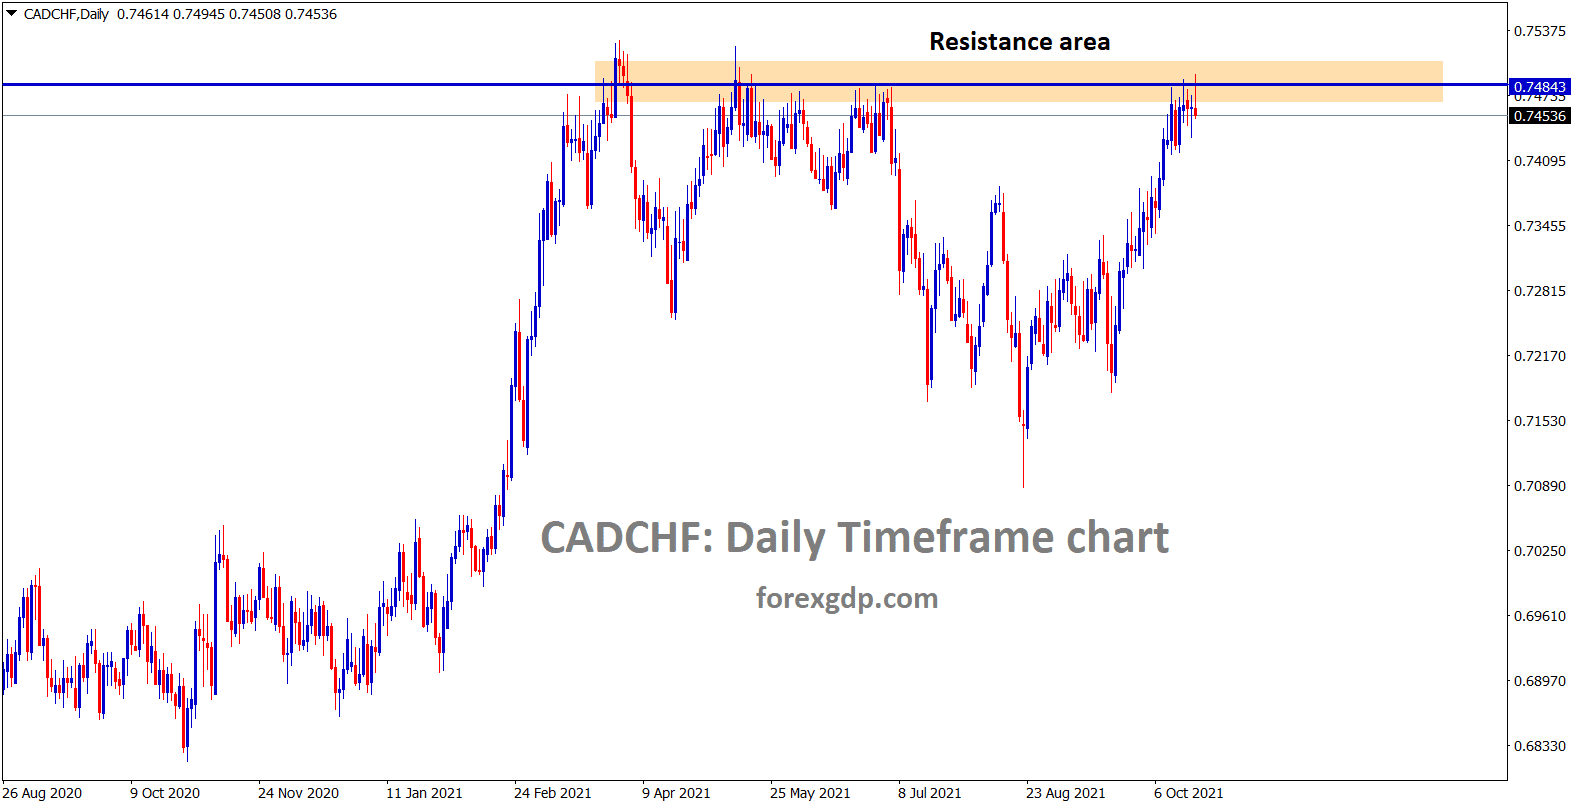 CADCHF has reached the major resistance area